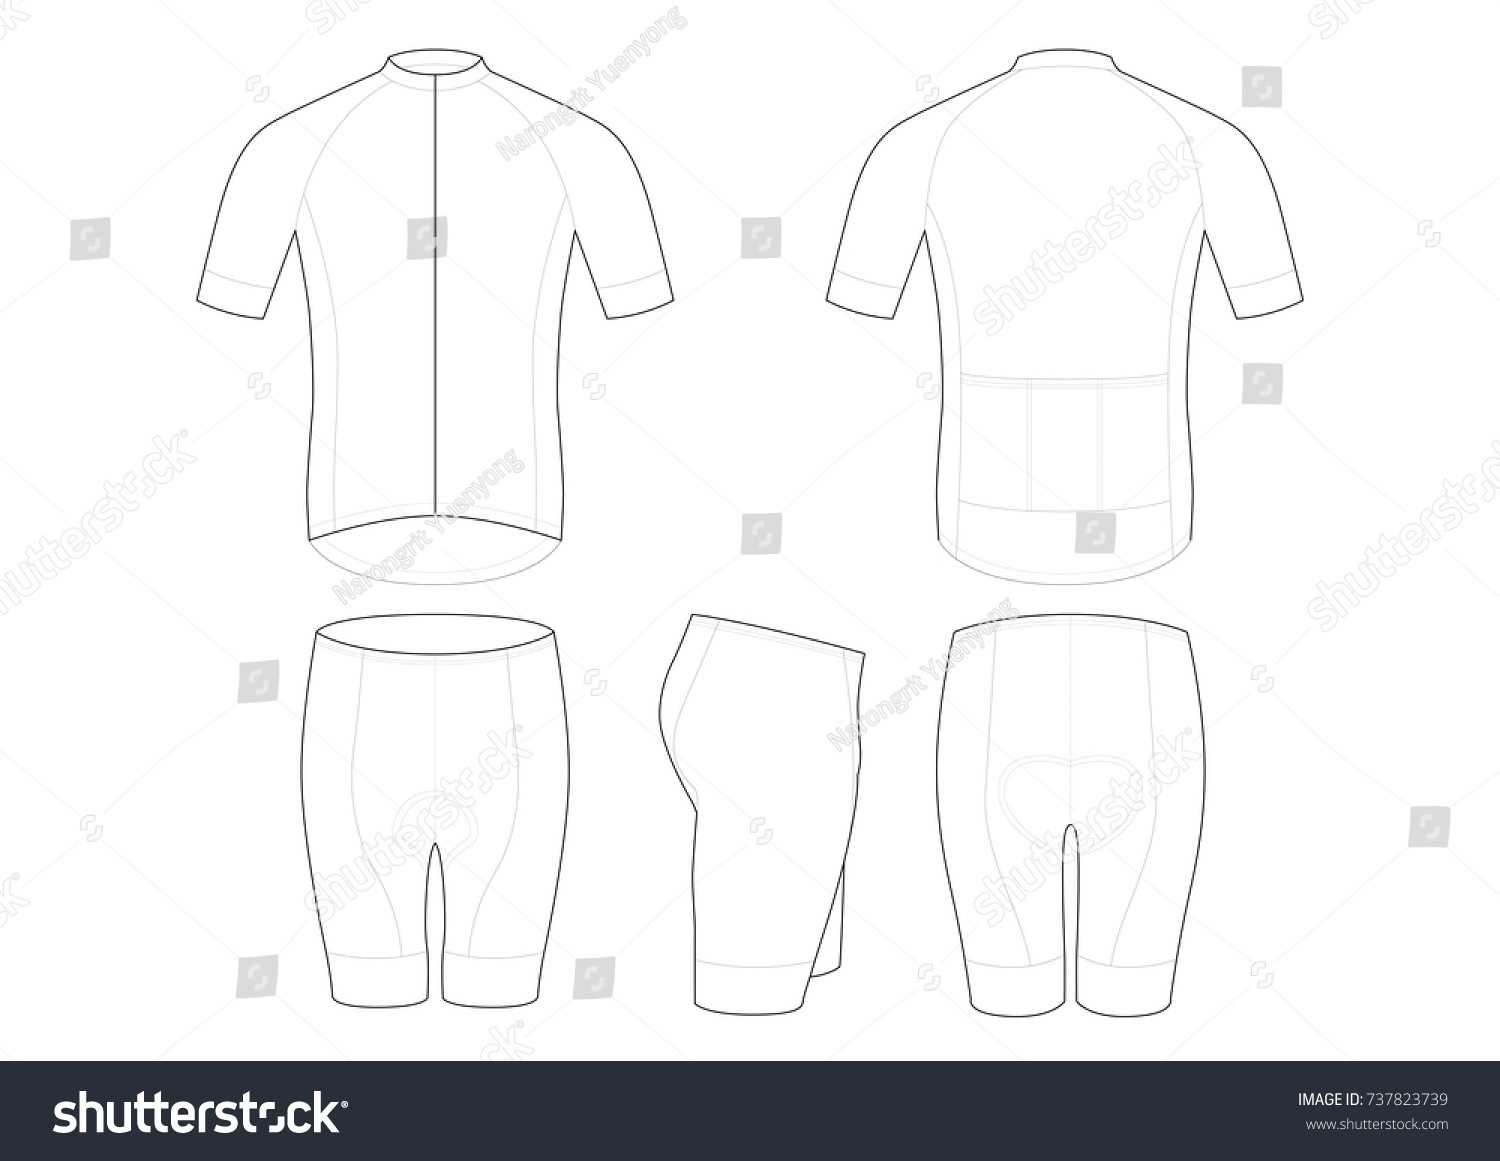 Cycling Jersey Template Design | Royalty Free Stock Image Intended For Blank Cycling Jersey Template